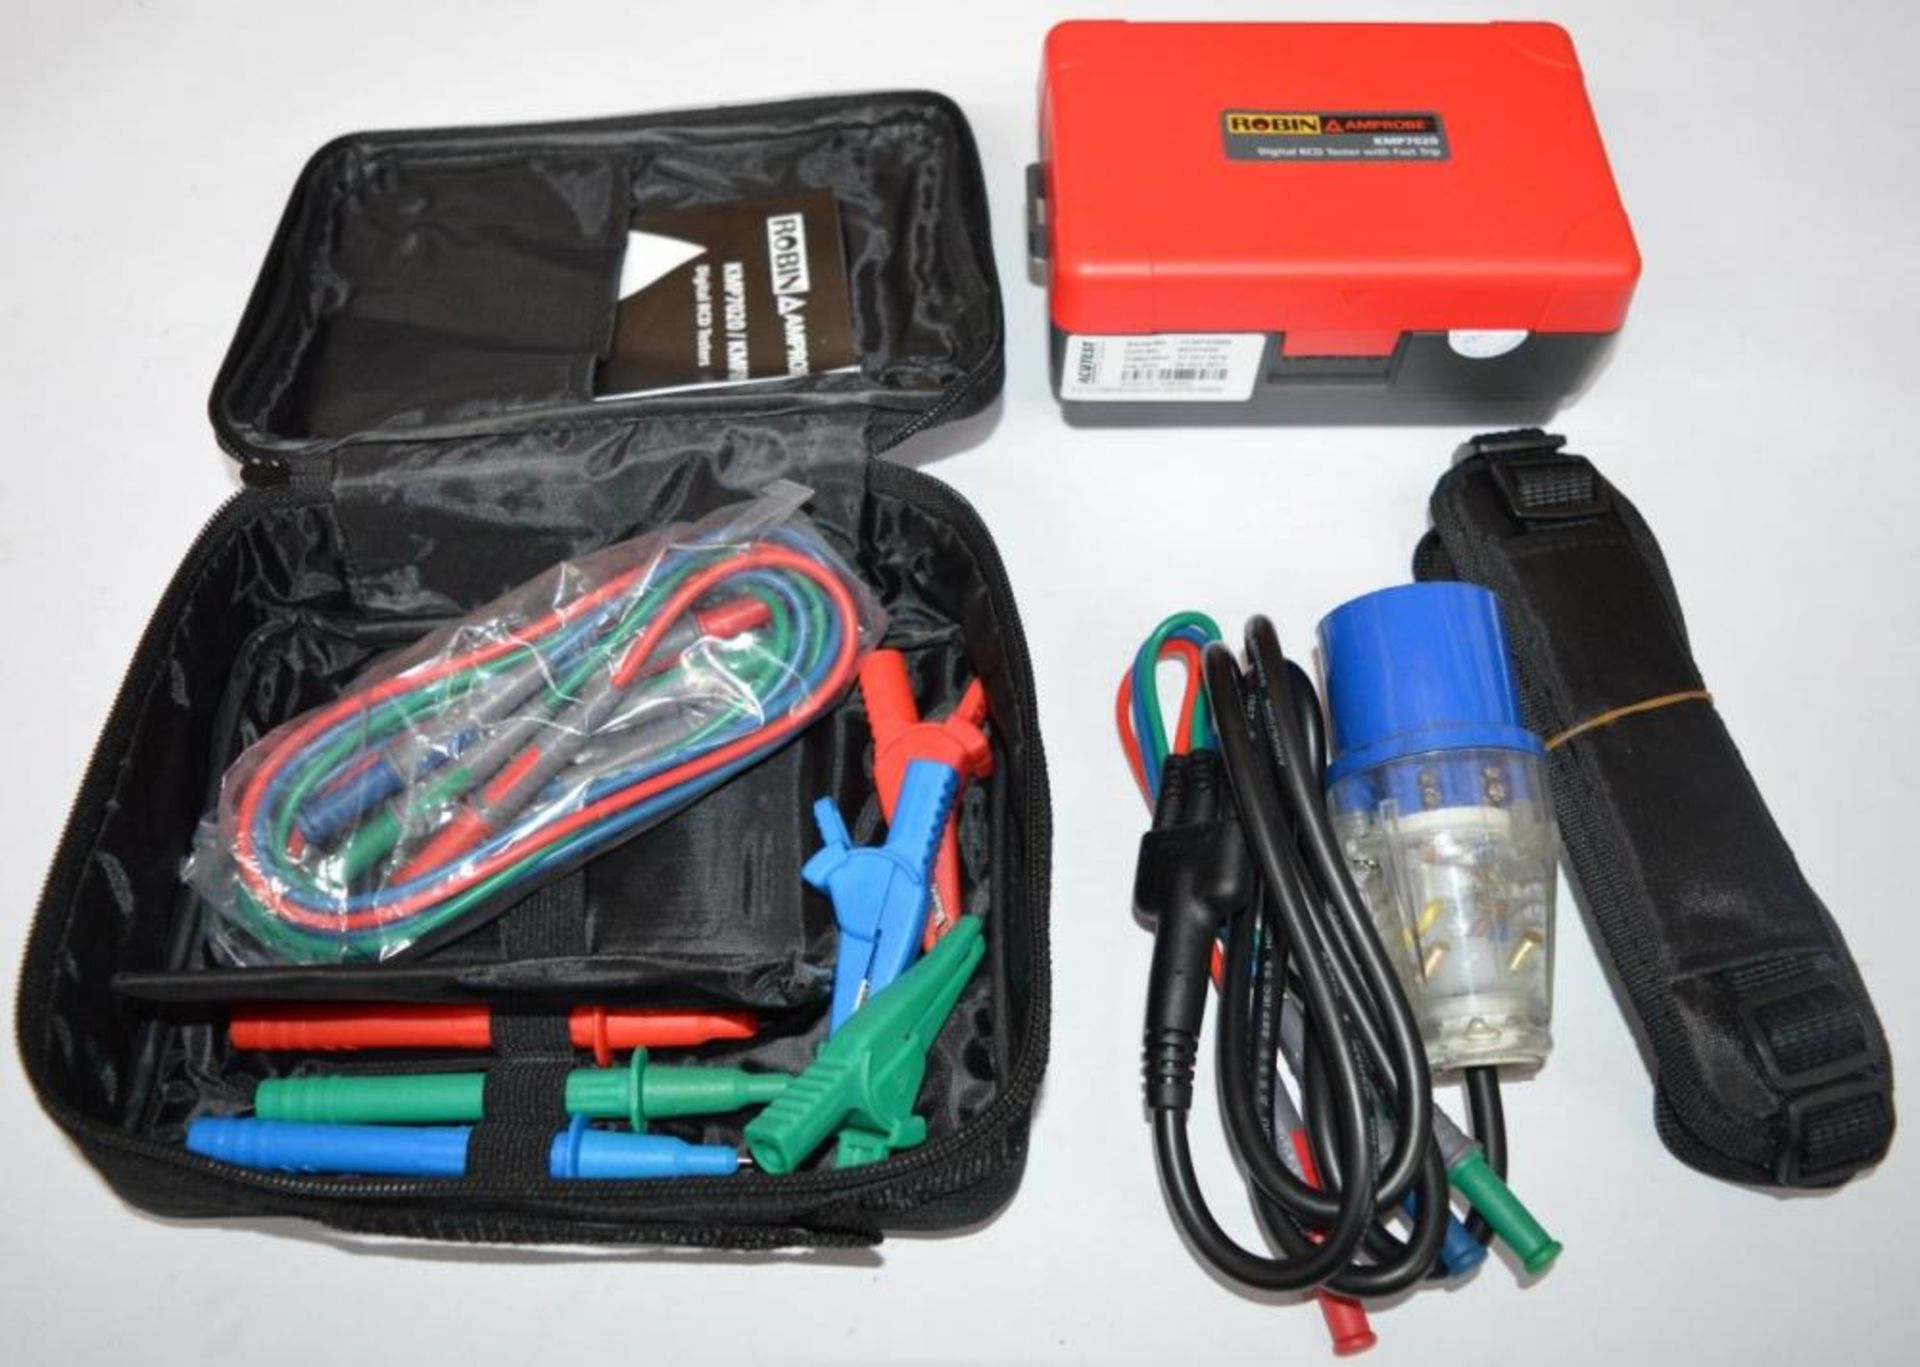 1 x Robin Amprobe Digital RCD Tester With Fast Trip - Model KMP7020 - Boxed With All Accessories - C - Image 3 of 12